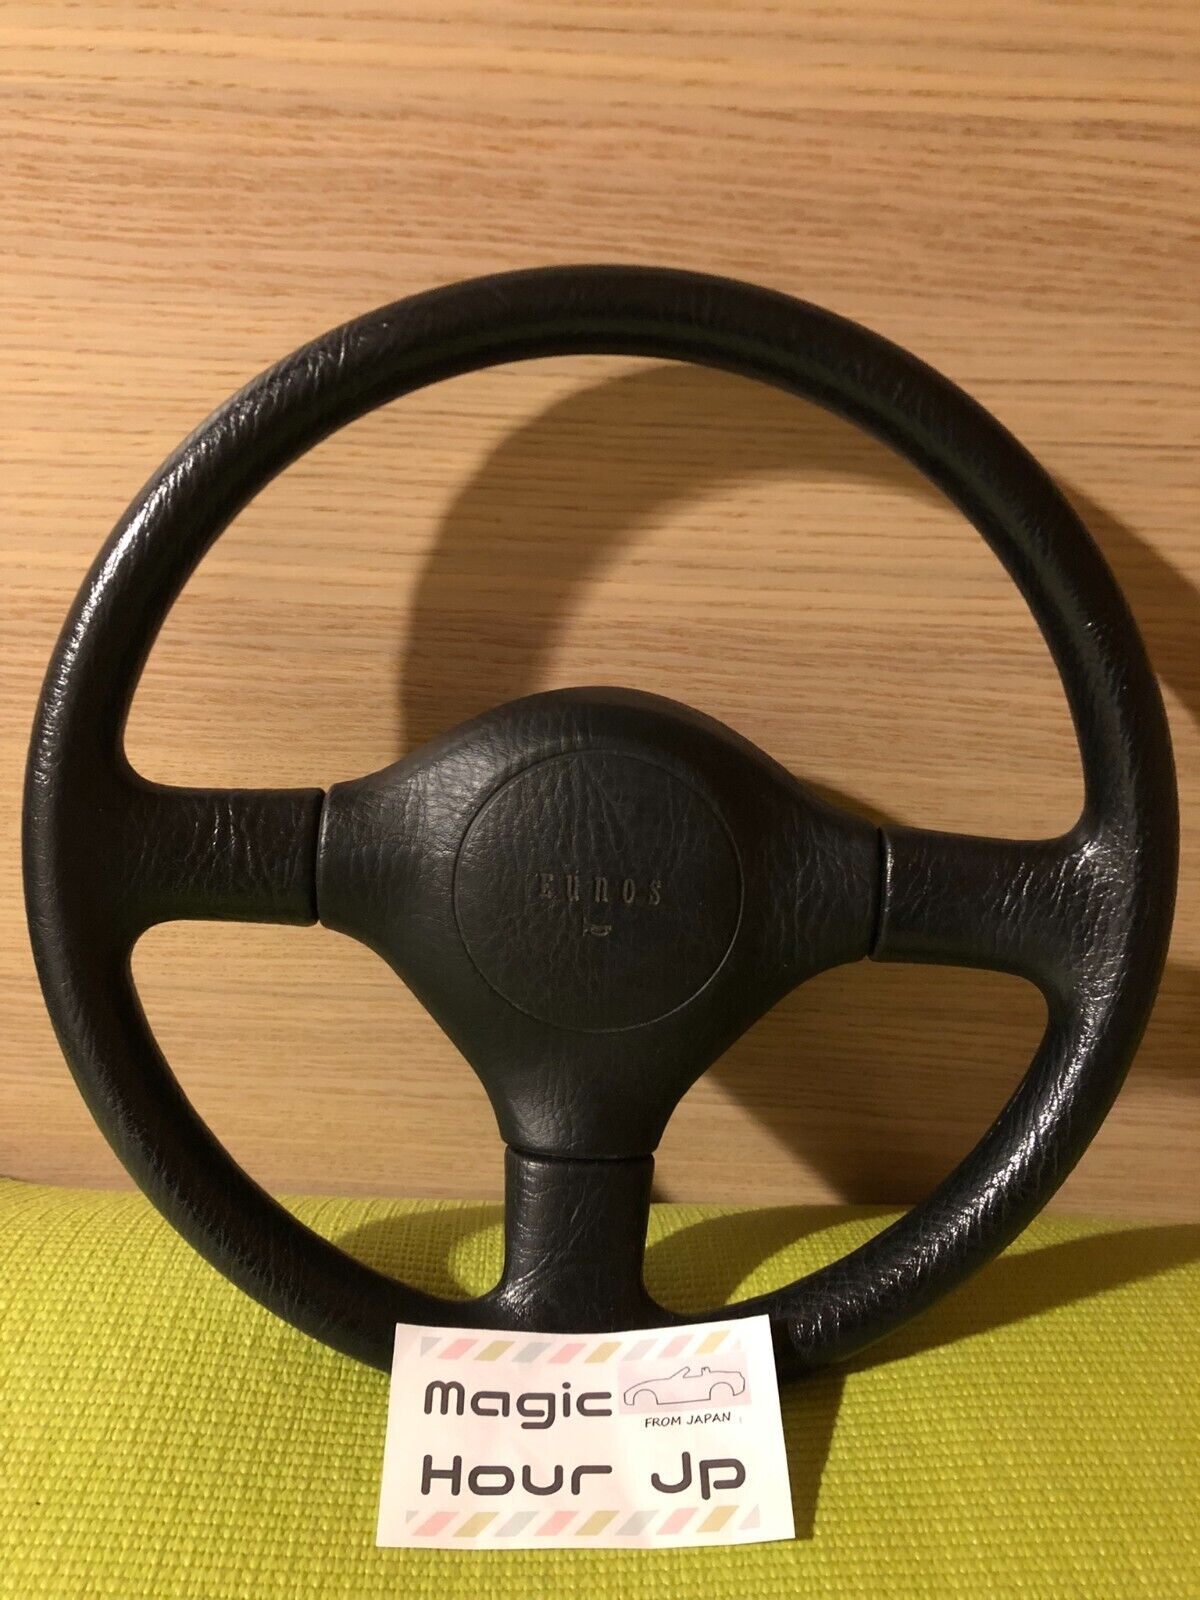 MAZDA MX-5 EUNOS Roadster NA8C NA6C leather steering wheel GOOD condition JDM